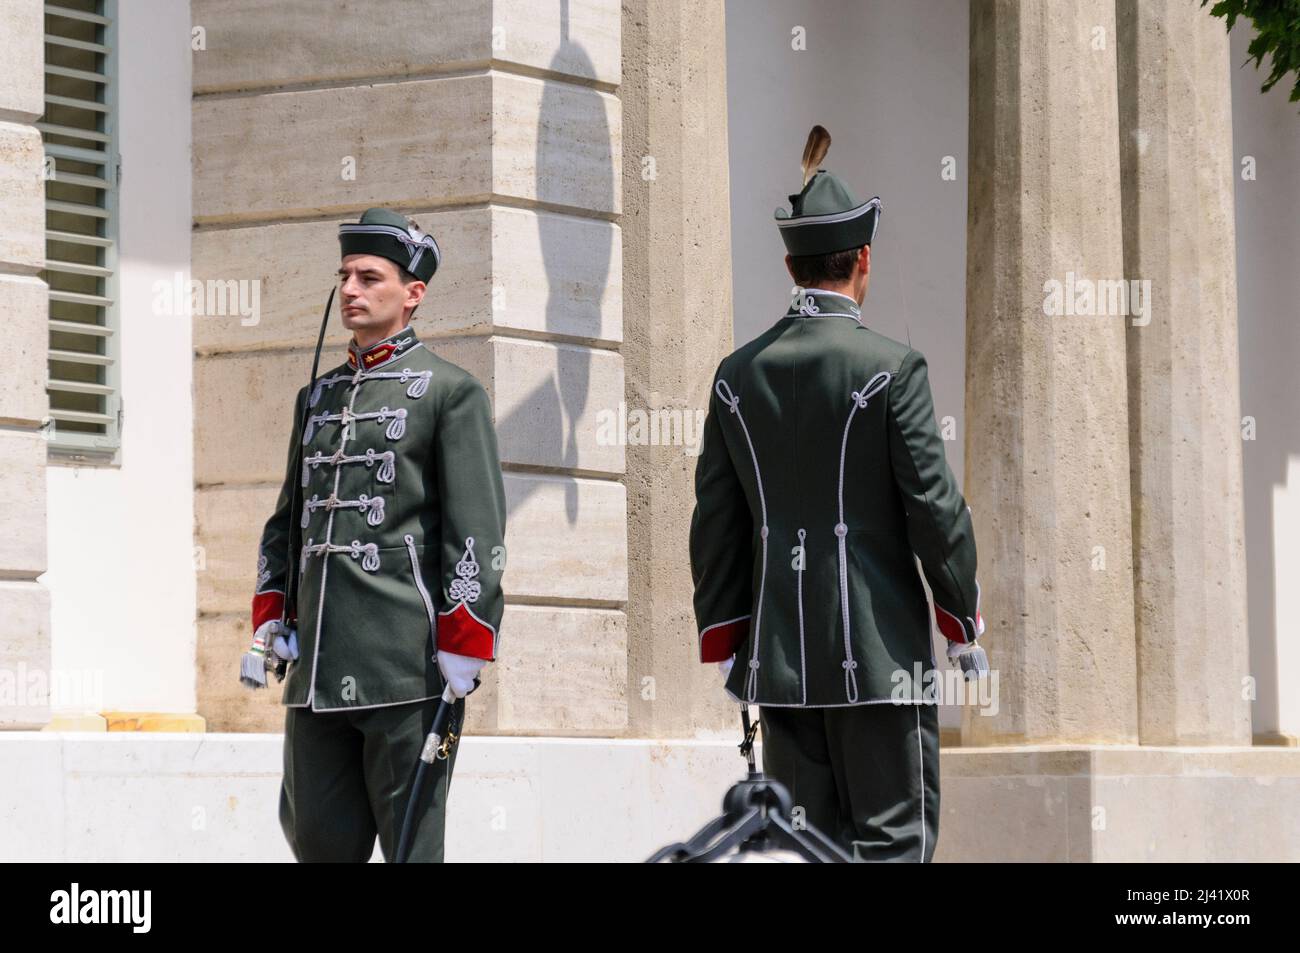 Budapest, Hungary.  13th July 2008.  Soldiers dressed in traditional uniform perform the changing of the guard ceremony at Sandor Palace, Buda Castle. Stock Photo